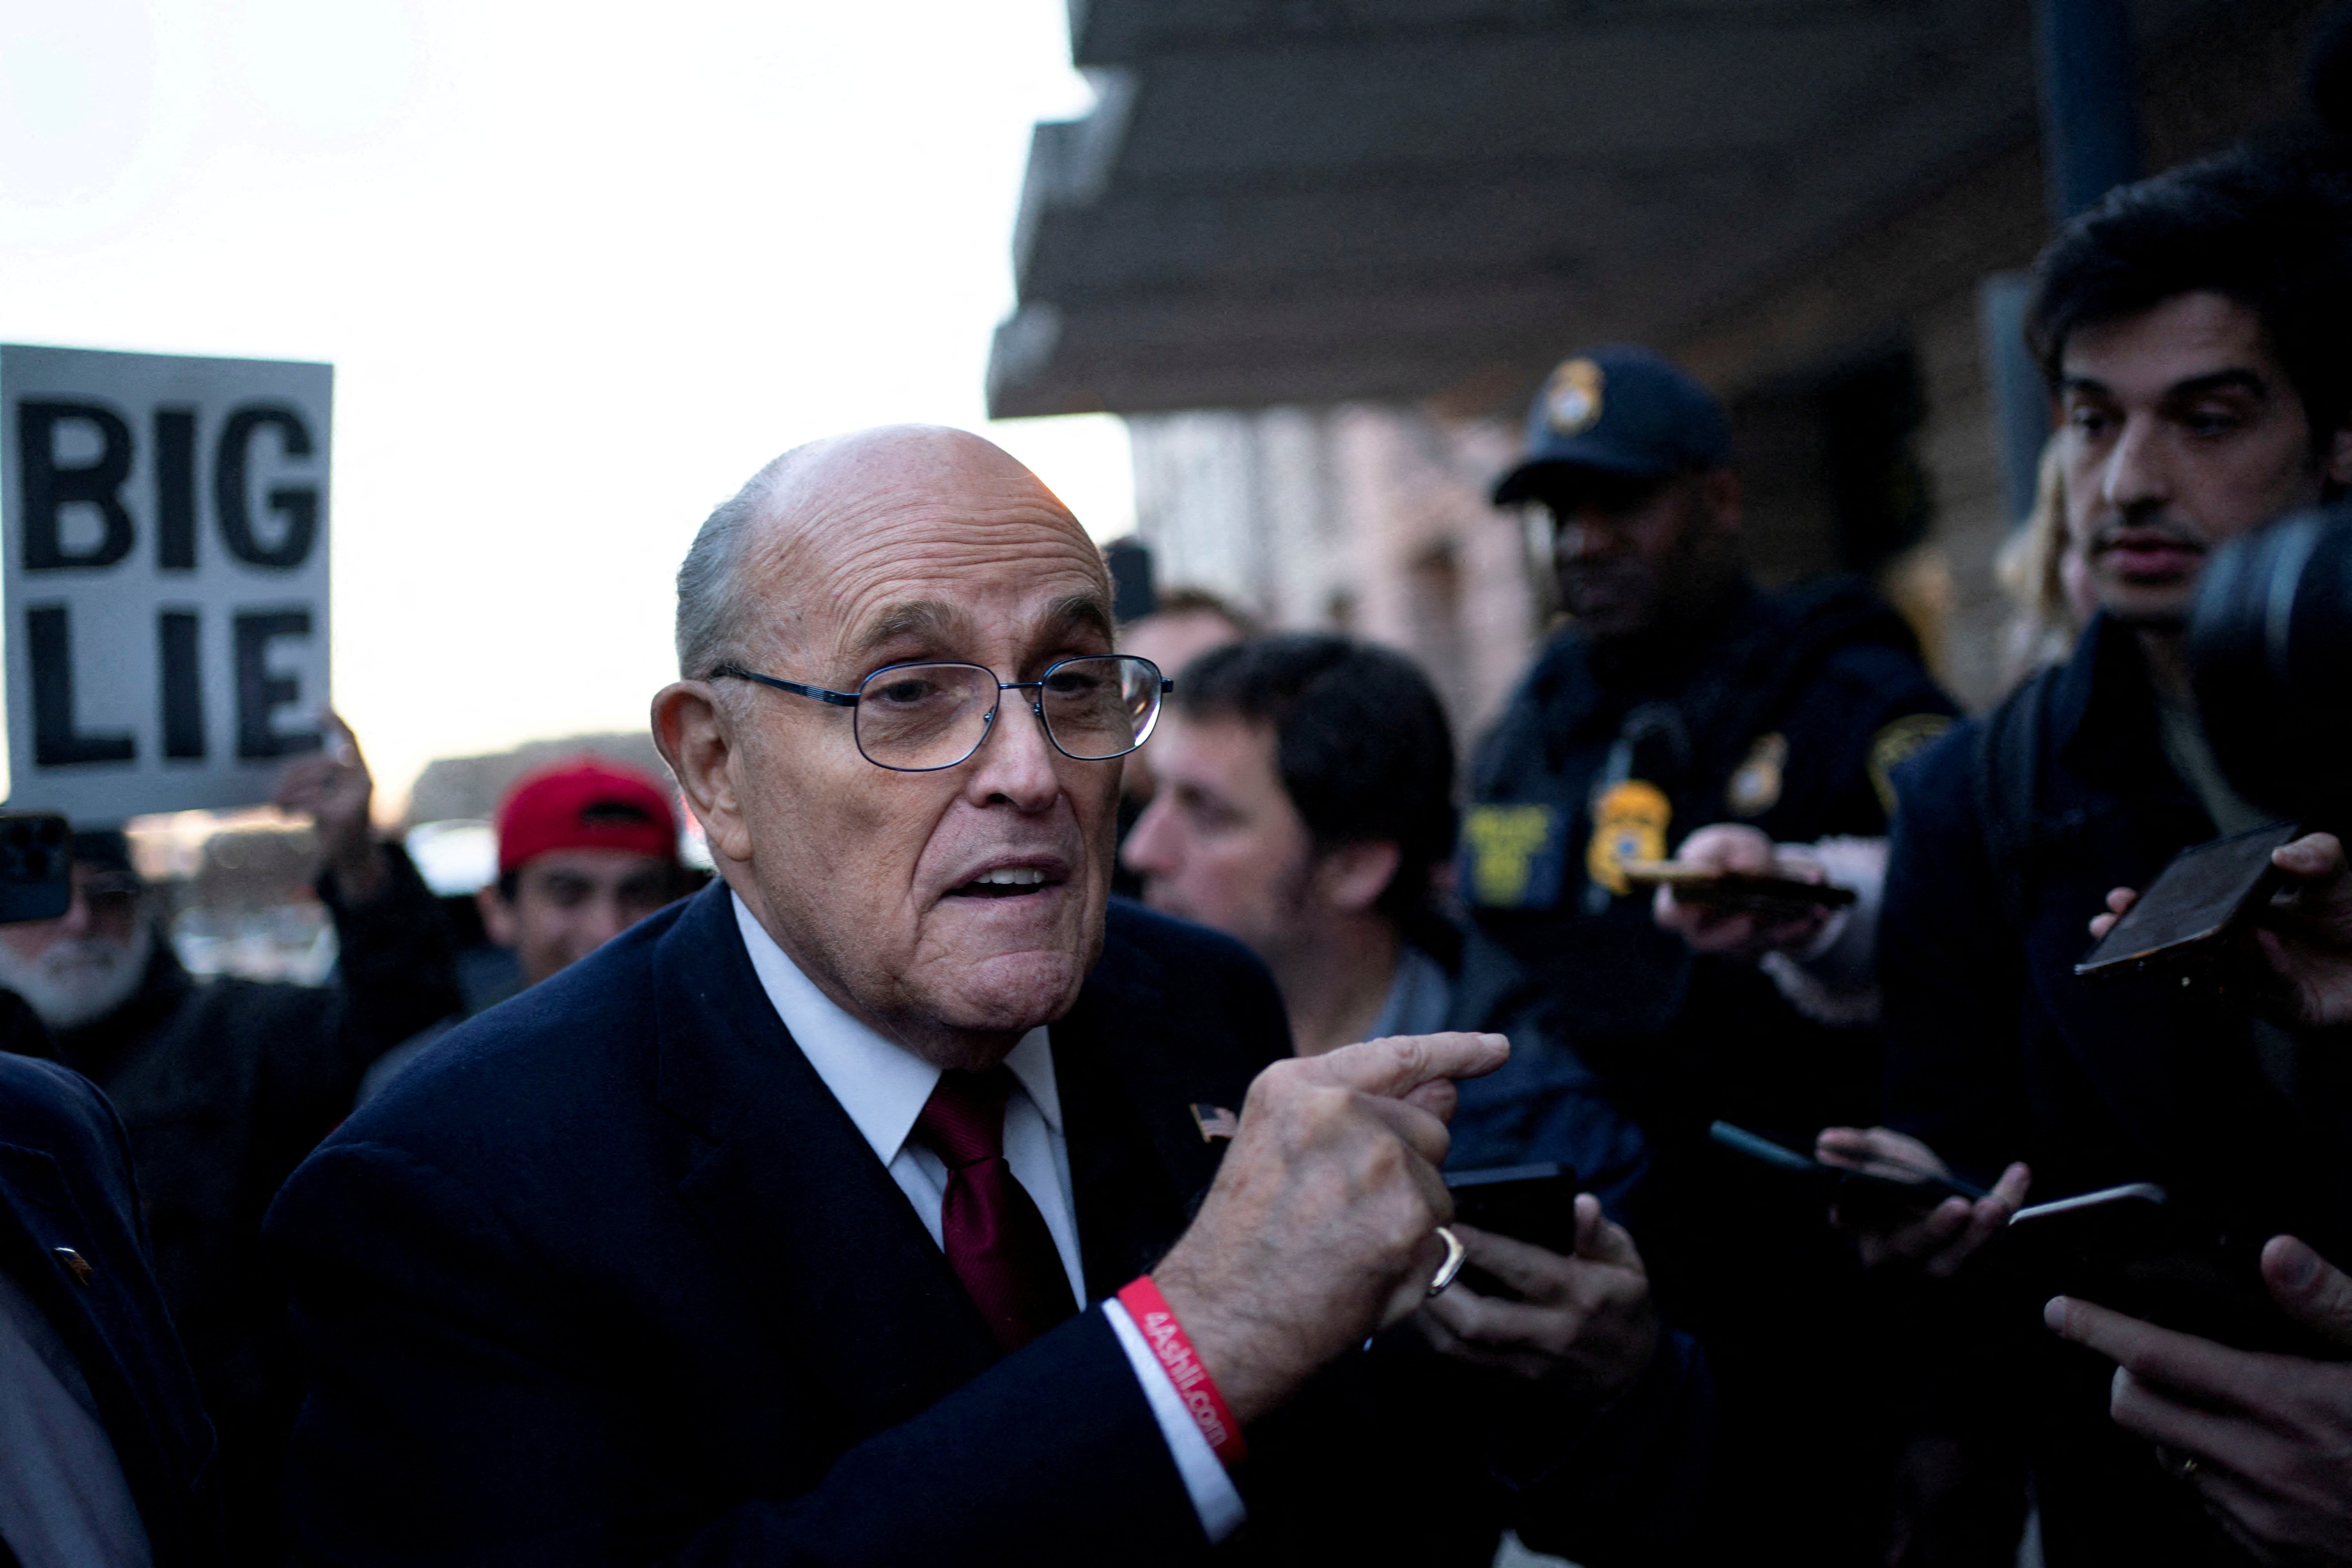 Former New York Mayor Rudy Giuliani departs the US District Courthouse after he was ordered to pay $148 million in his defamation case in Washington